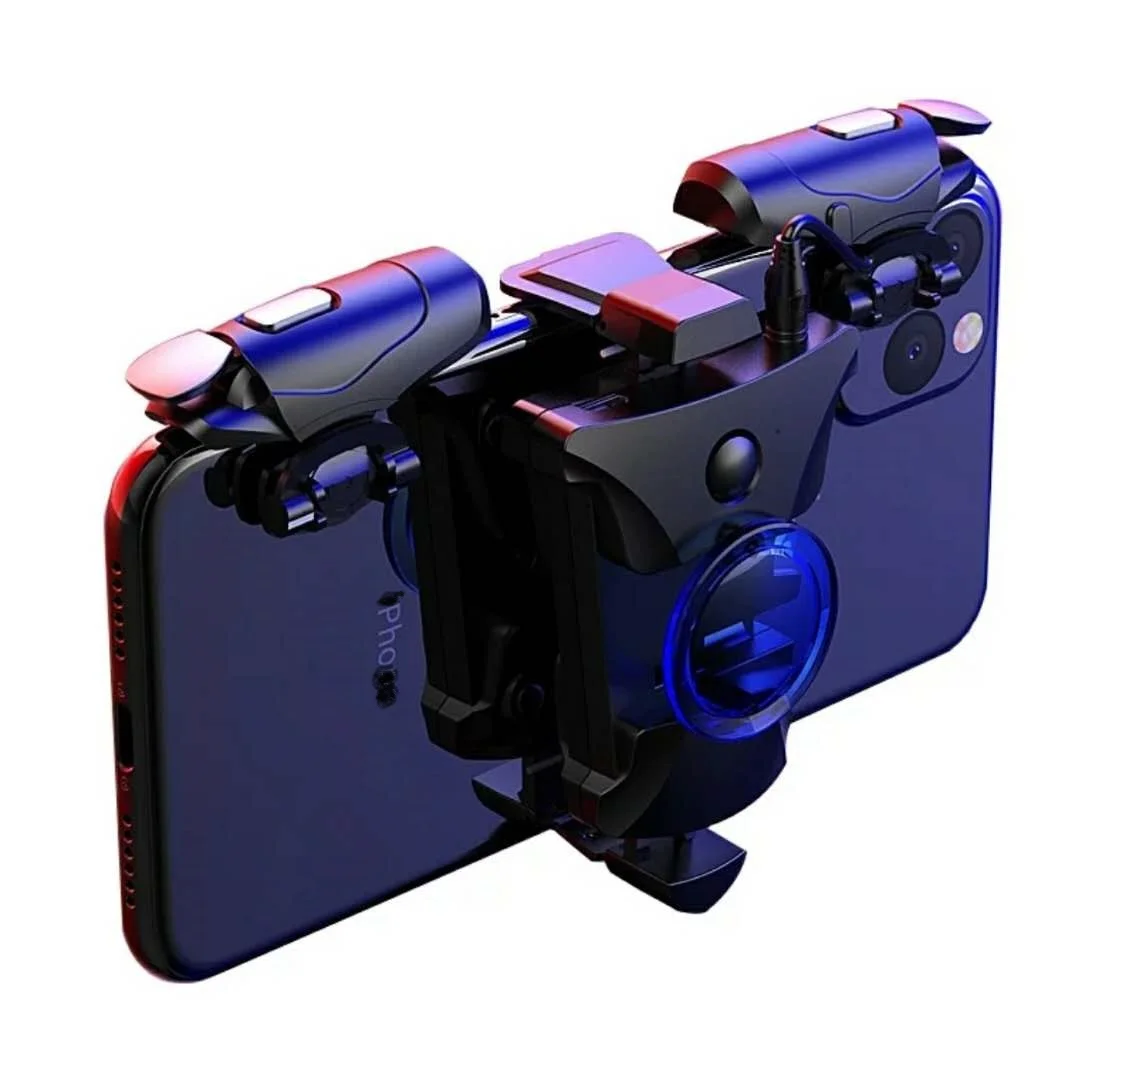 
fast continous shooting Gamepad for PUBG Controller Double Cool Fan Game Controller Joystick Android IOS Mobile Gamepad  (62270541837)